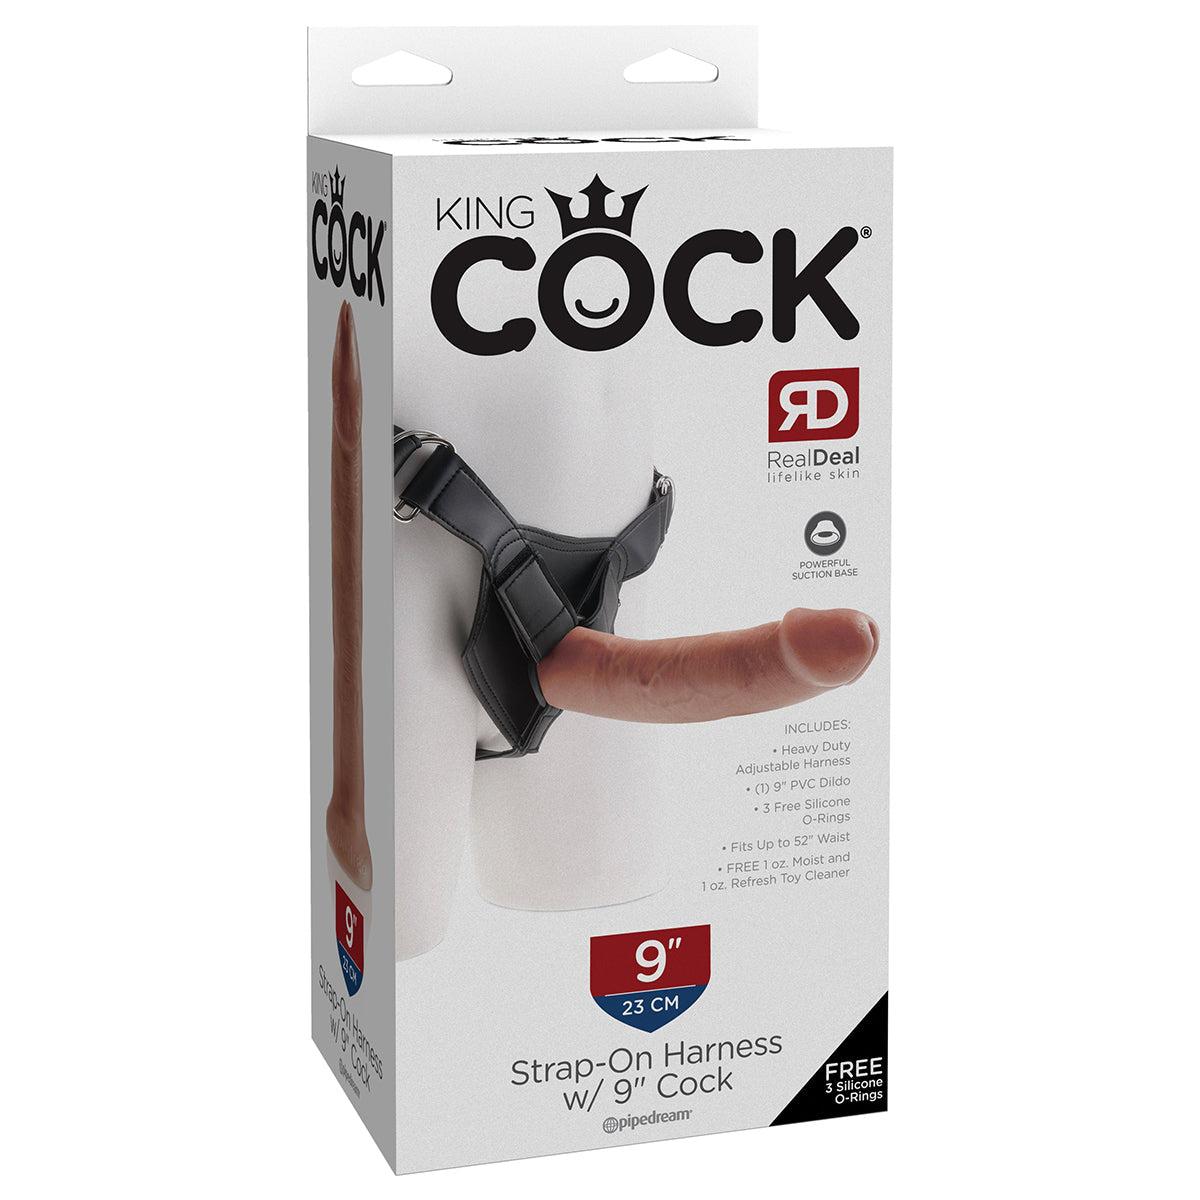 King Cock Strap-On Harness with 9" Cock - Tan